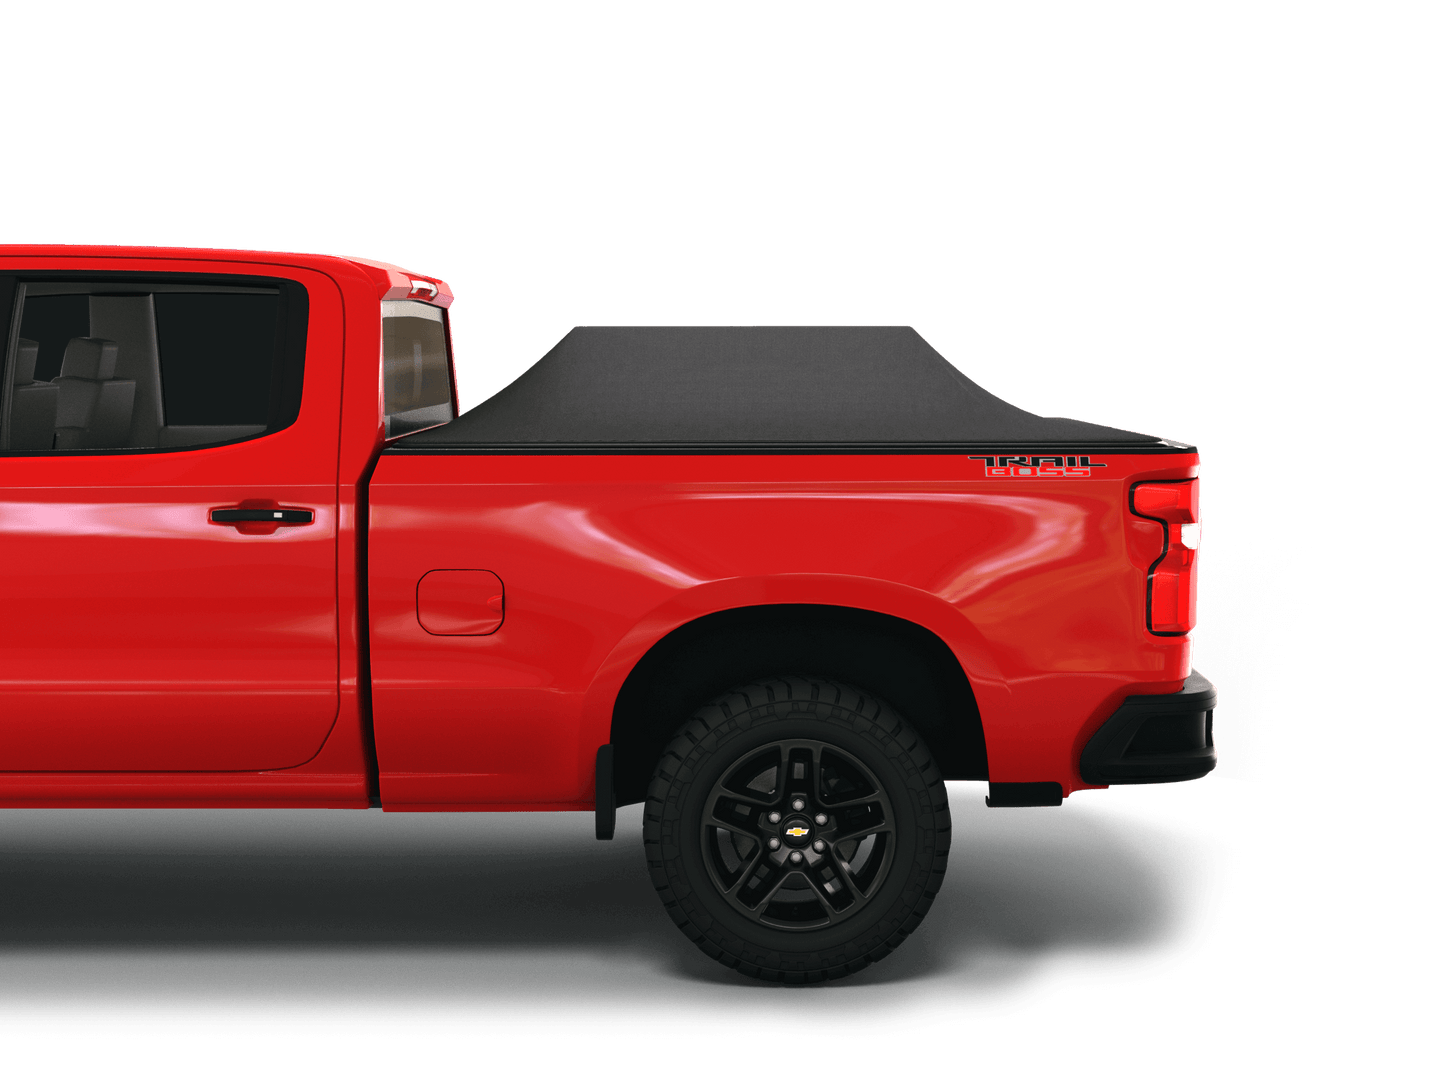 Red Chevrolet Silverado 2500HD / 3500 HD / GMC Sierra 2500HD / 3500HD with Sawtooth Stretch tonneau cover expanded over cargo load